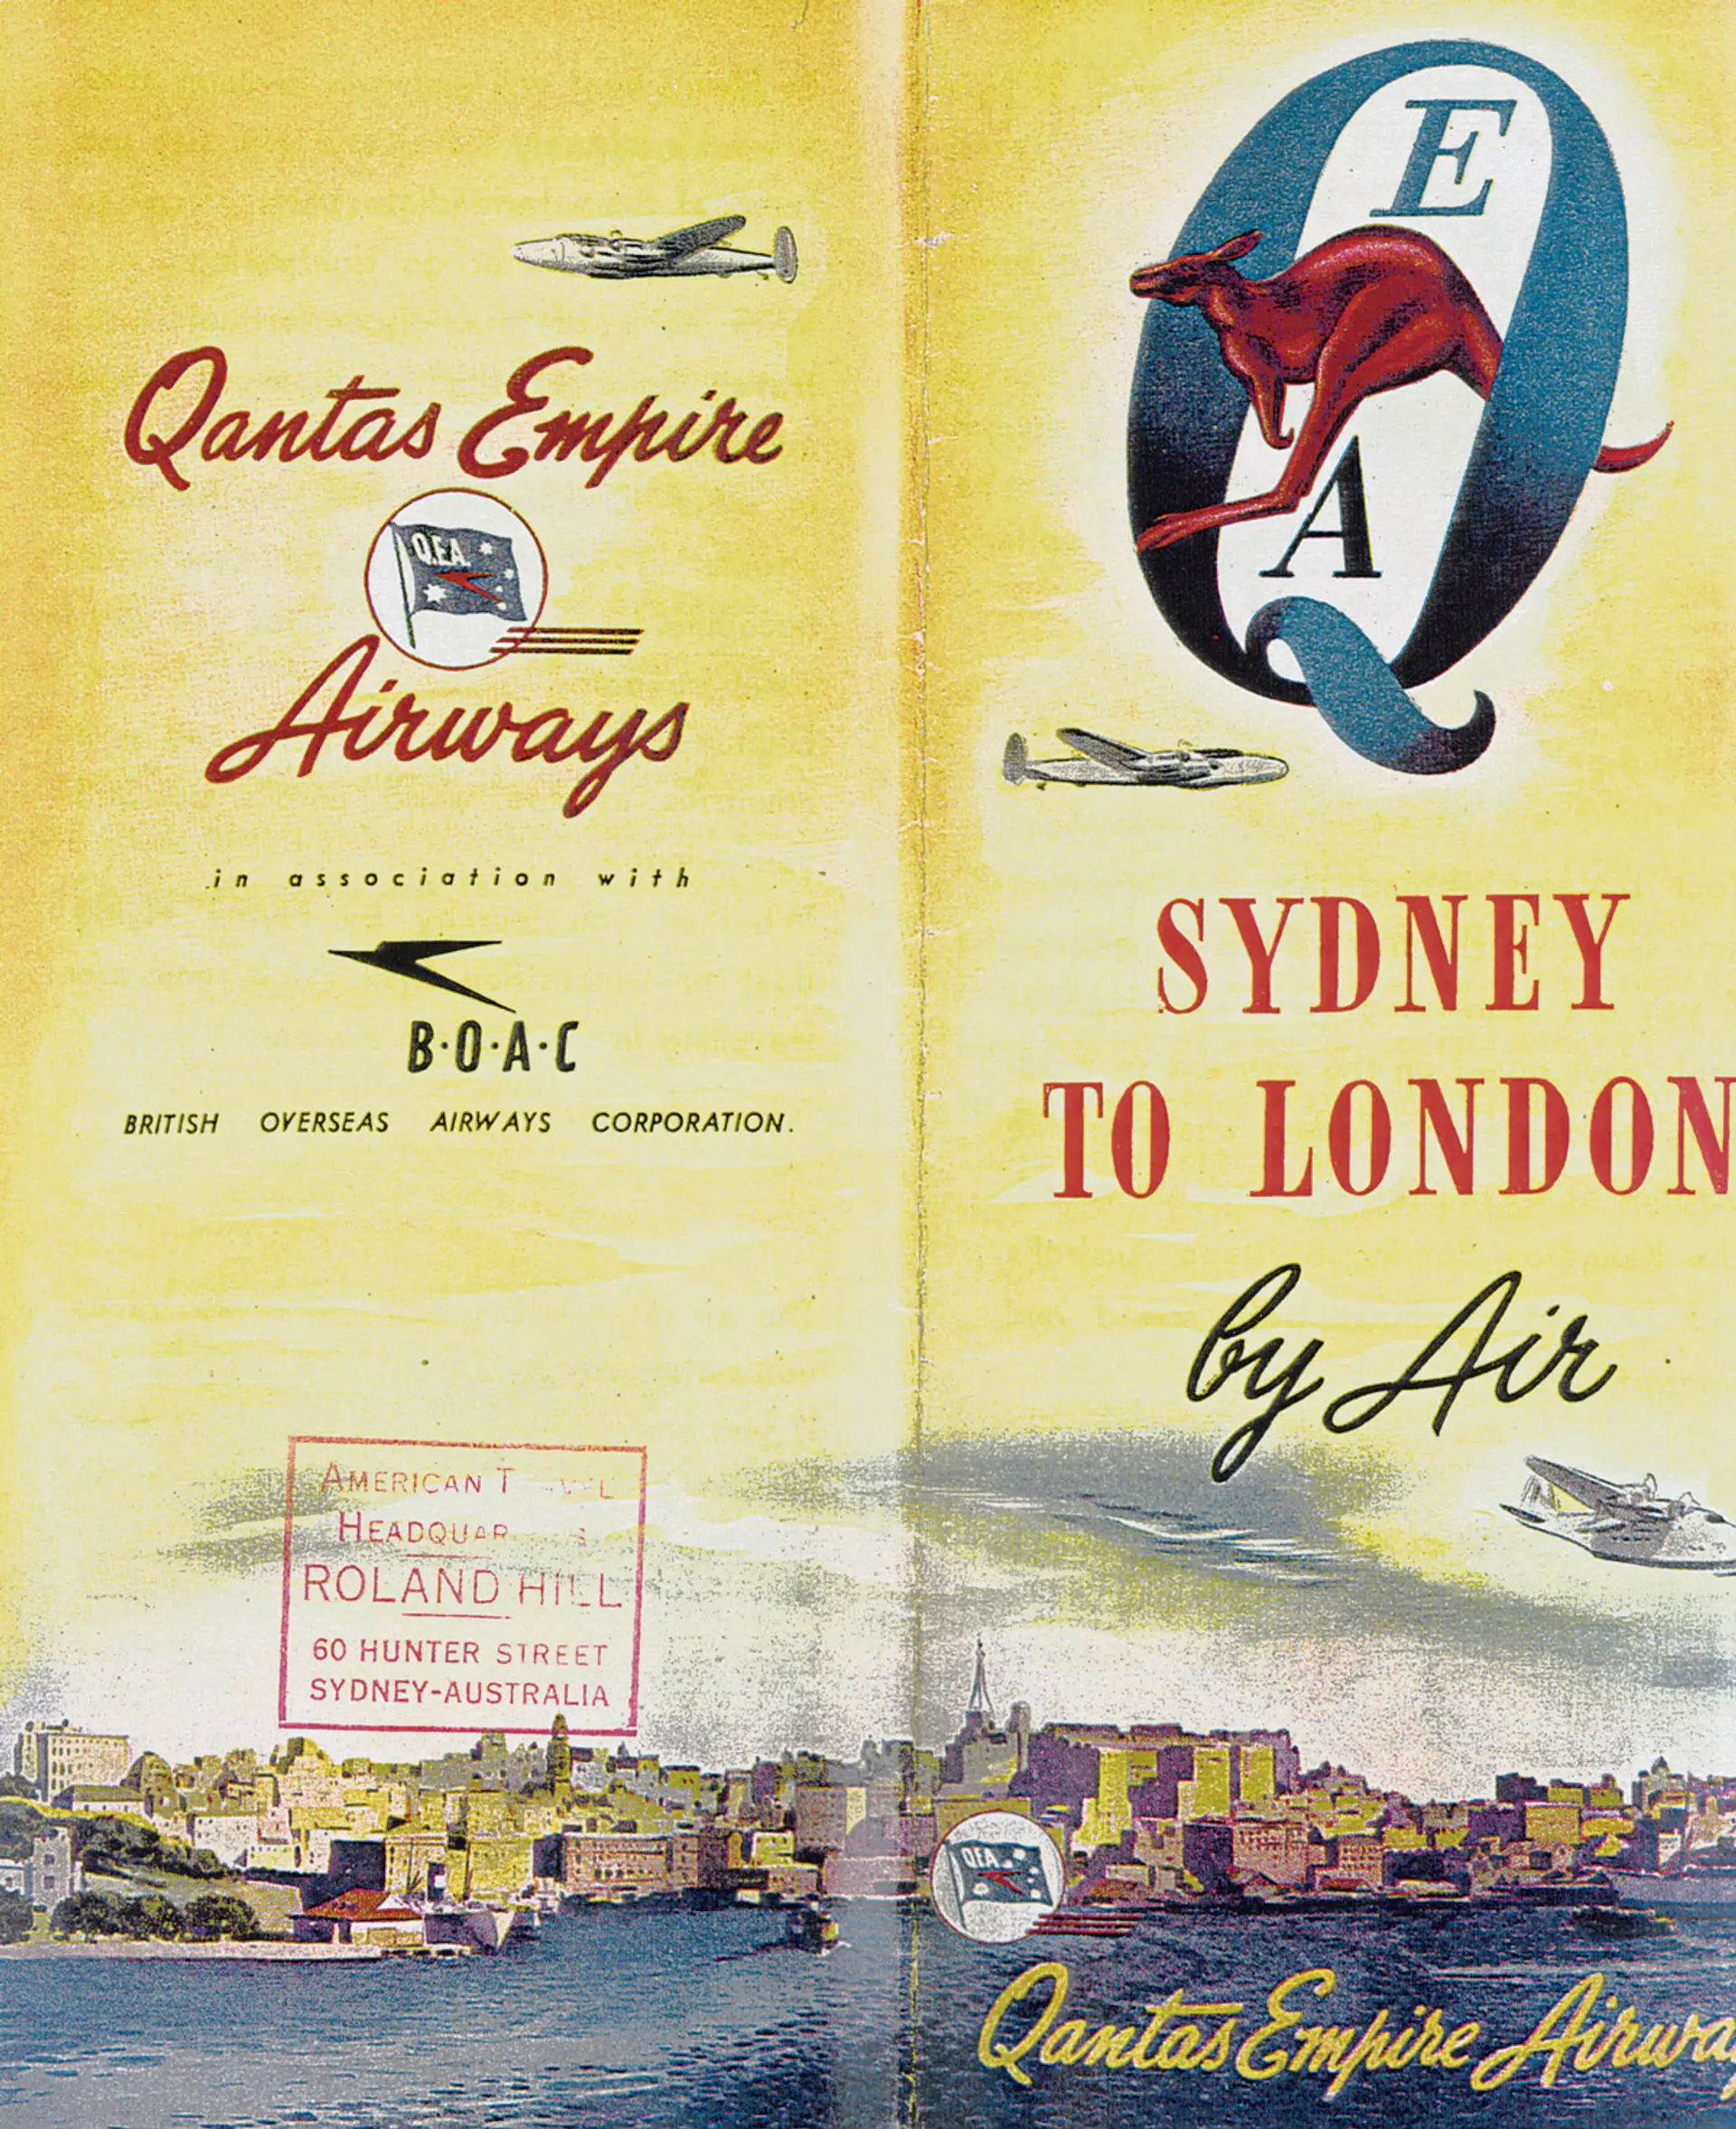 Empire-Class-Flying-Boats-carried-mail-and-passengers-in-style-from-Sydney-to-London-in-1938-1939.jpg